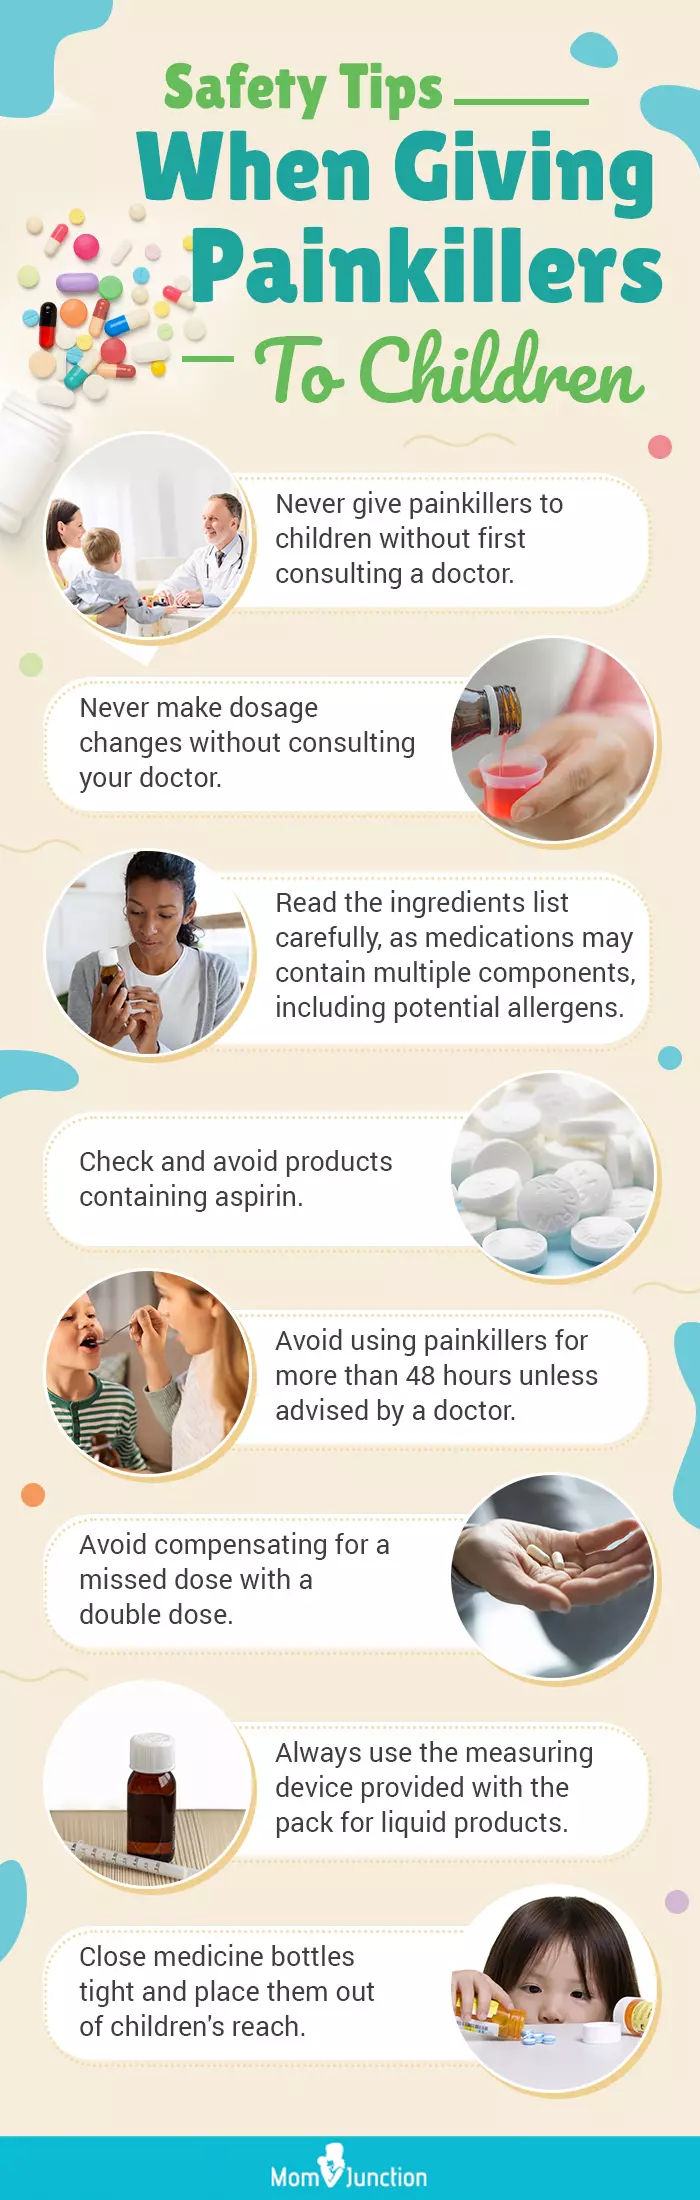 safety tips when giving painkillers to children (infographic)